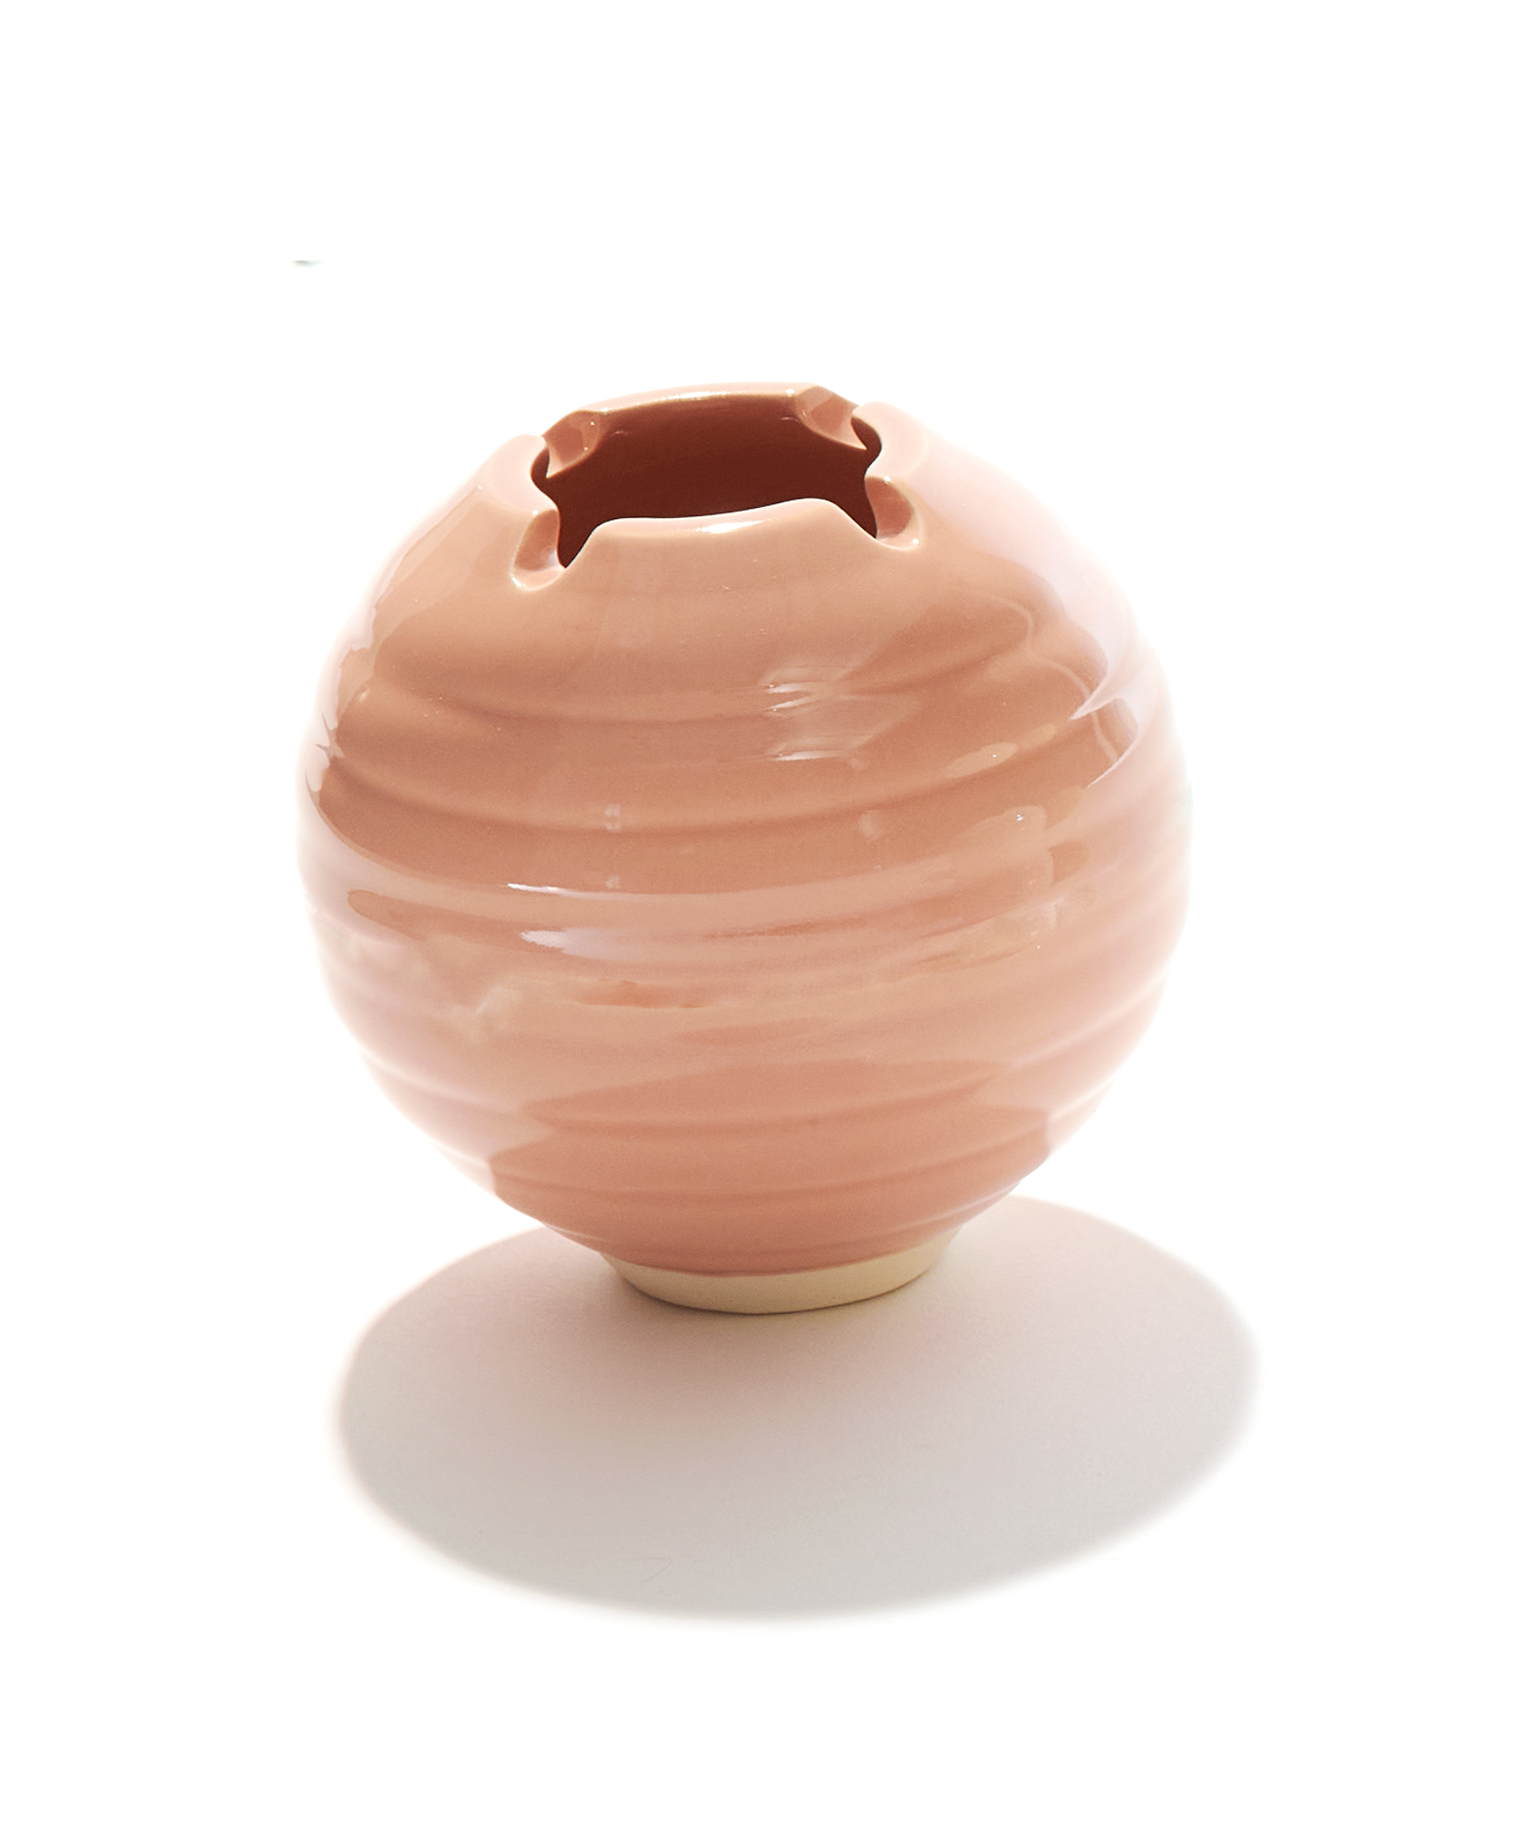 A ceramic ashtray that features a poker and a lid, this cannabis accessory is handmade by a woman-owned studio in the USA. The Orb in beige pink comfortably fits in your hand and doubles as art in your home with secure fit lid. The Orb ashtray is a discreet weed accessory to use while using your favorite bud products.